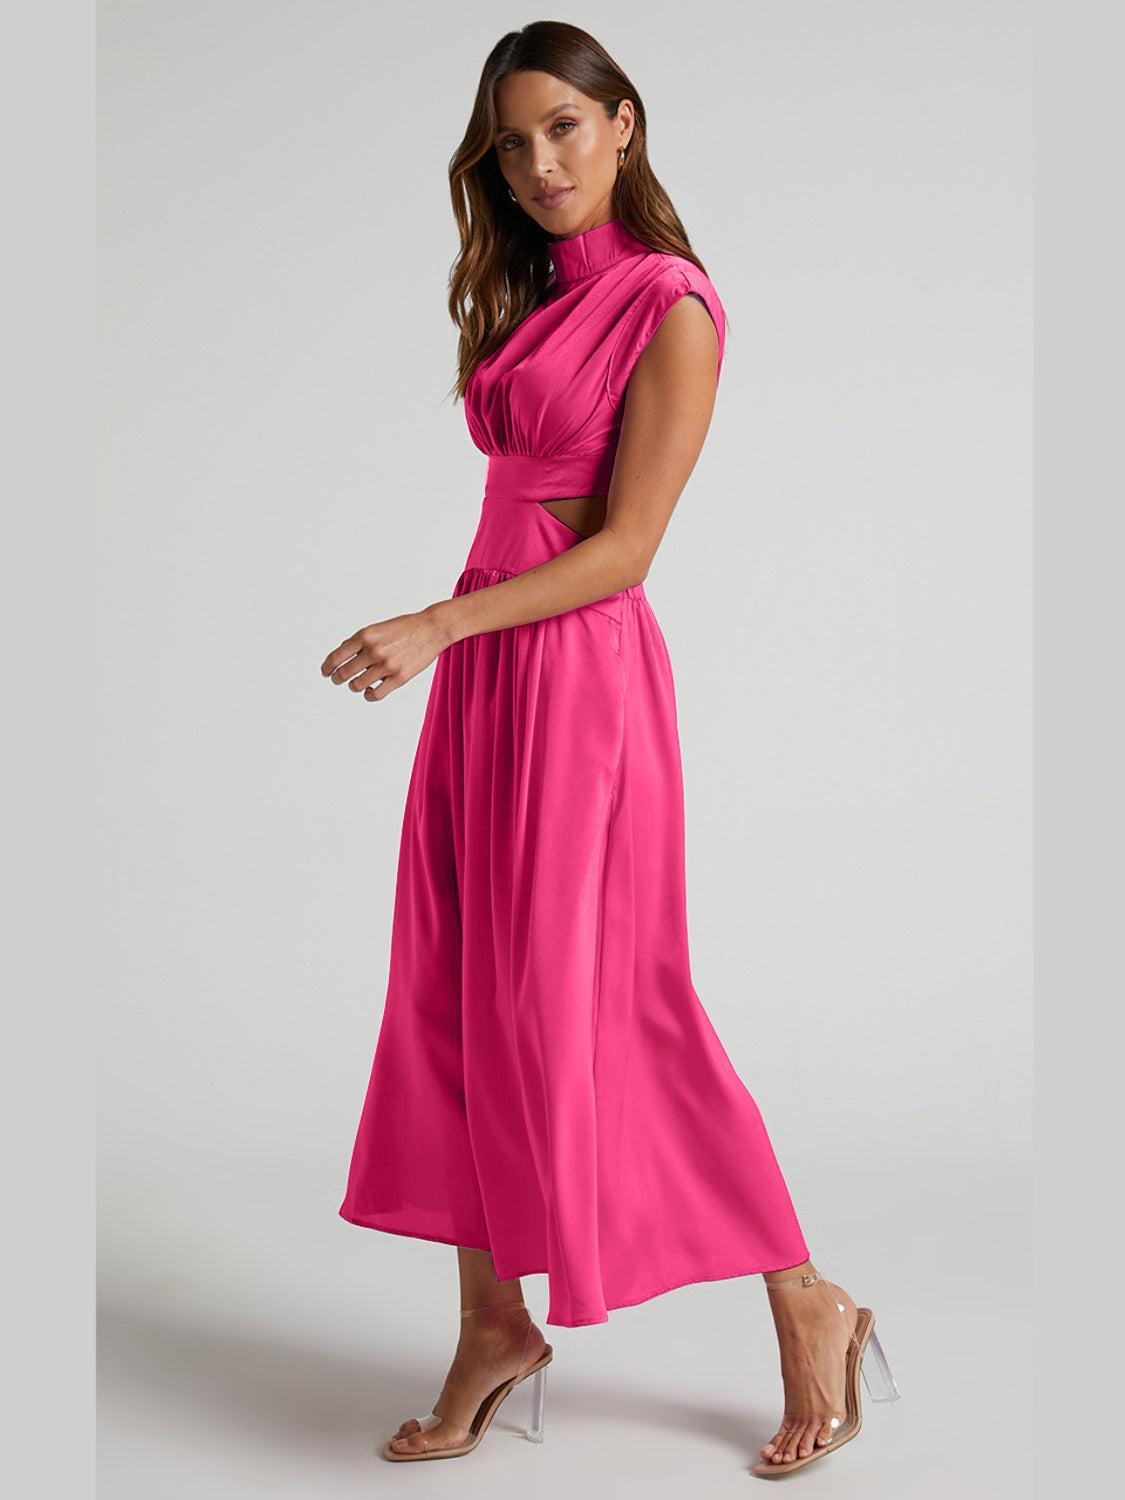 a woman in a pink dress poses for a picture